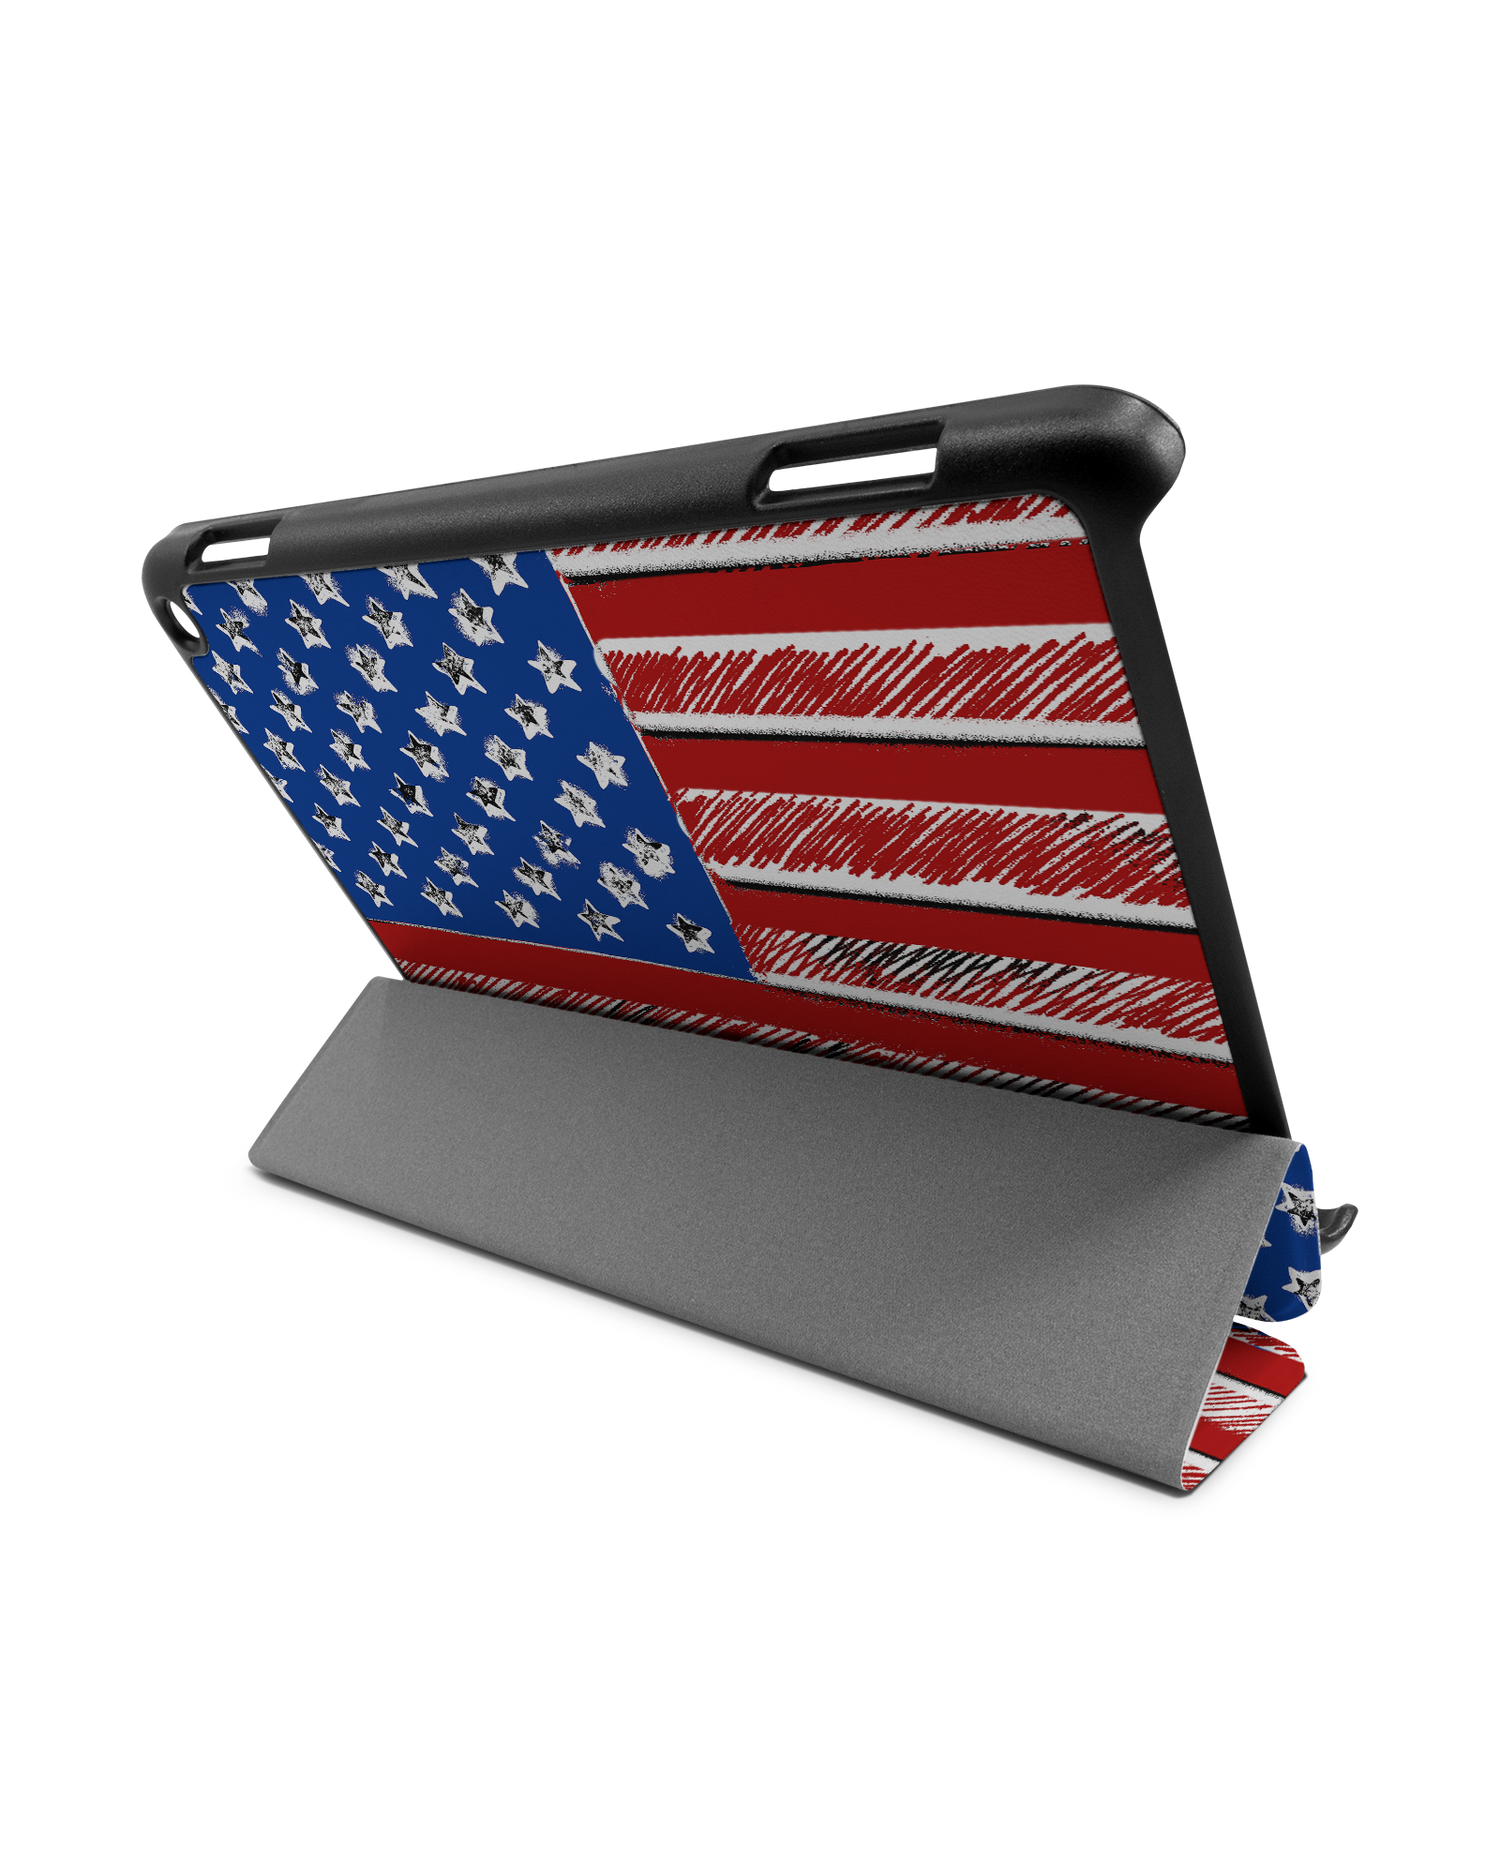 American Flag Color Tablet Smart Case for Amazon Fire HD 8 (2022), Amazon Fire HD 8 Plus (2022), Amazon Fire HD 8 (2020), Amazon Fire HD 8 Plus (2020): Used as Stand